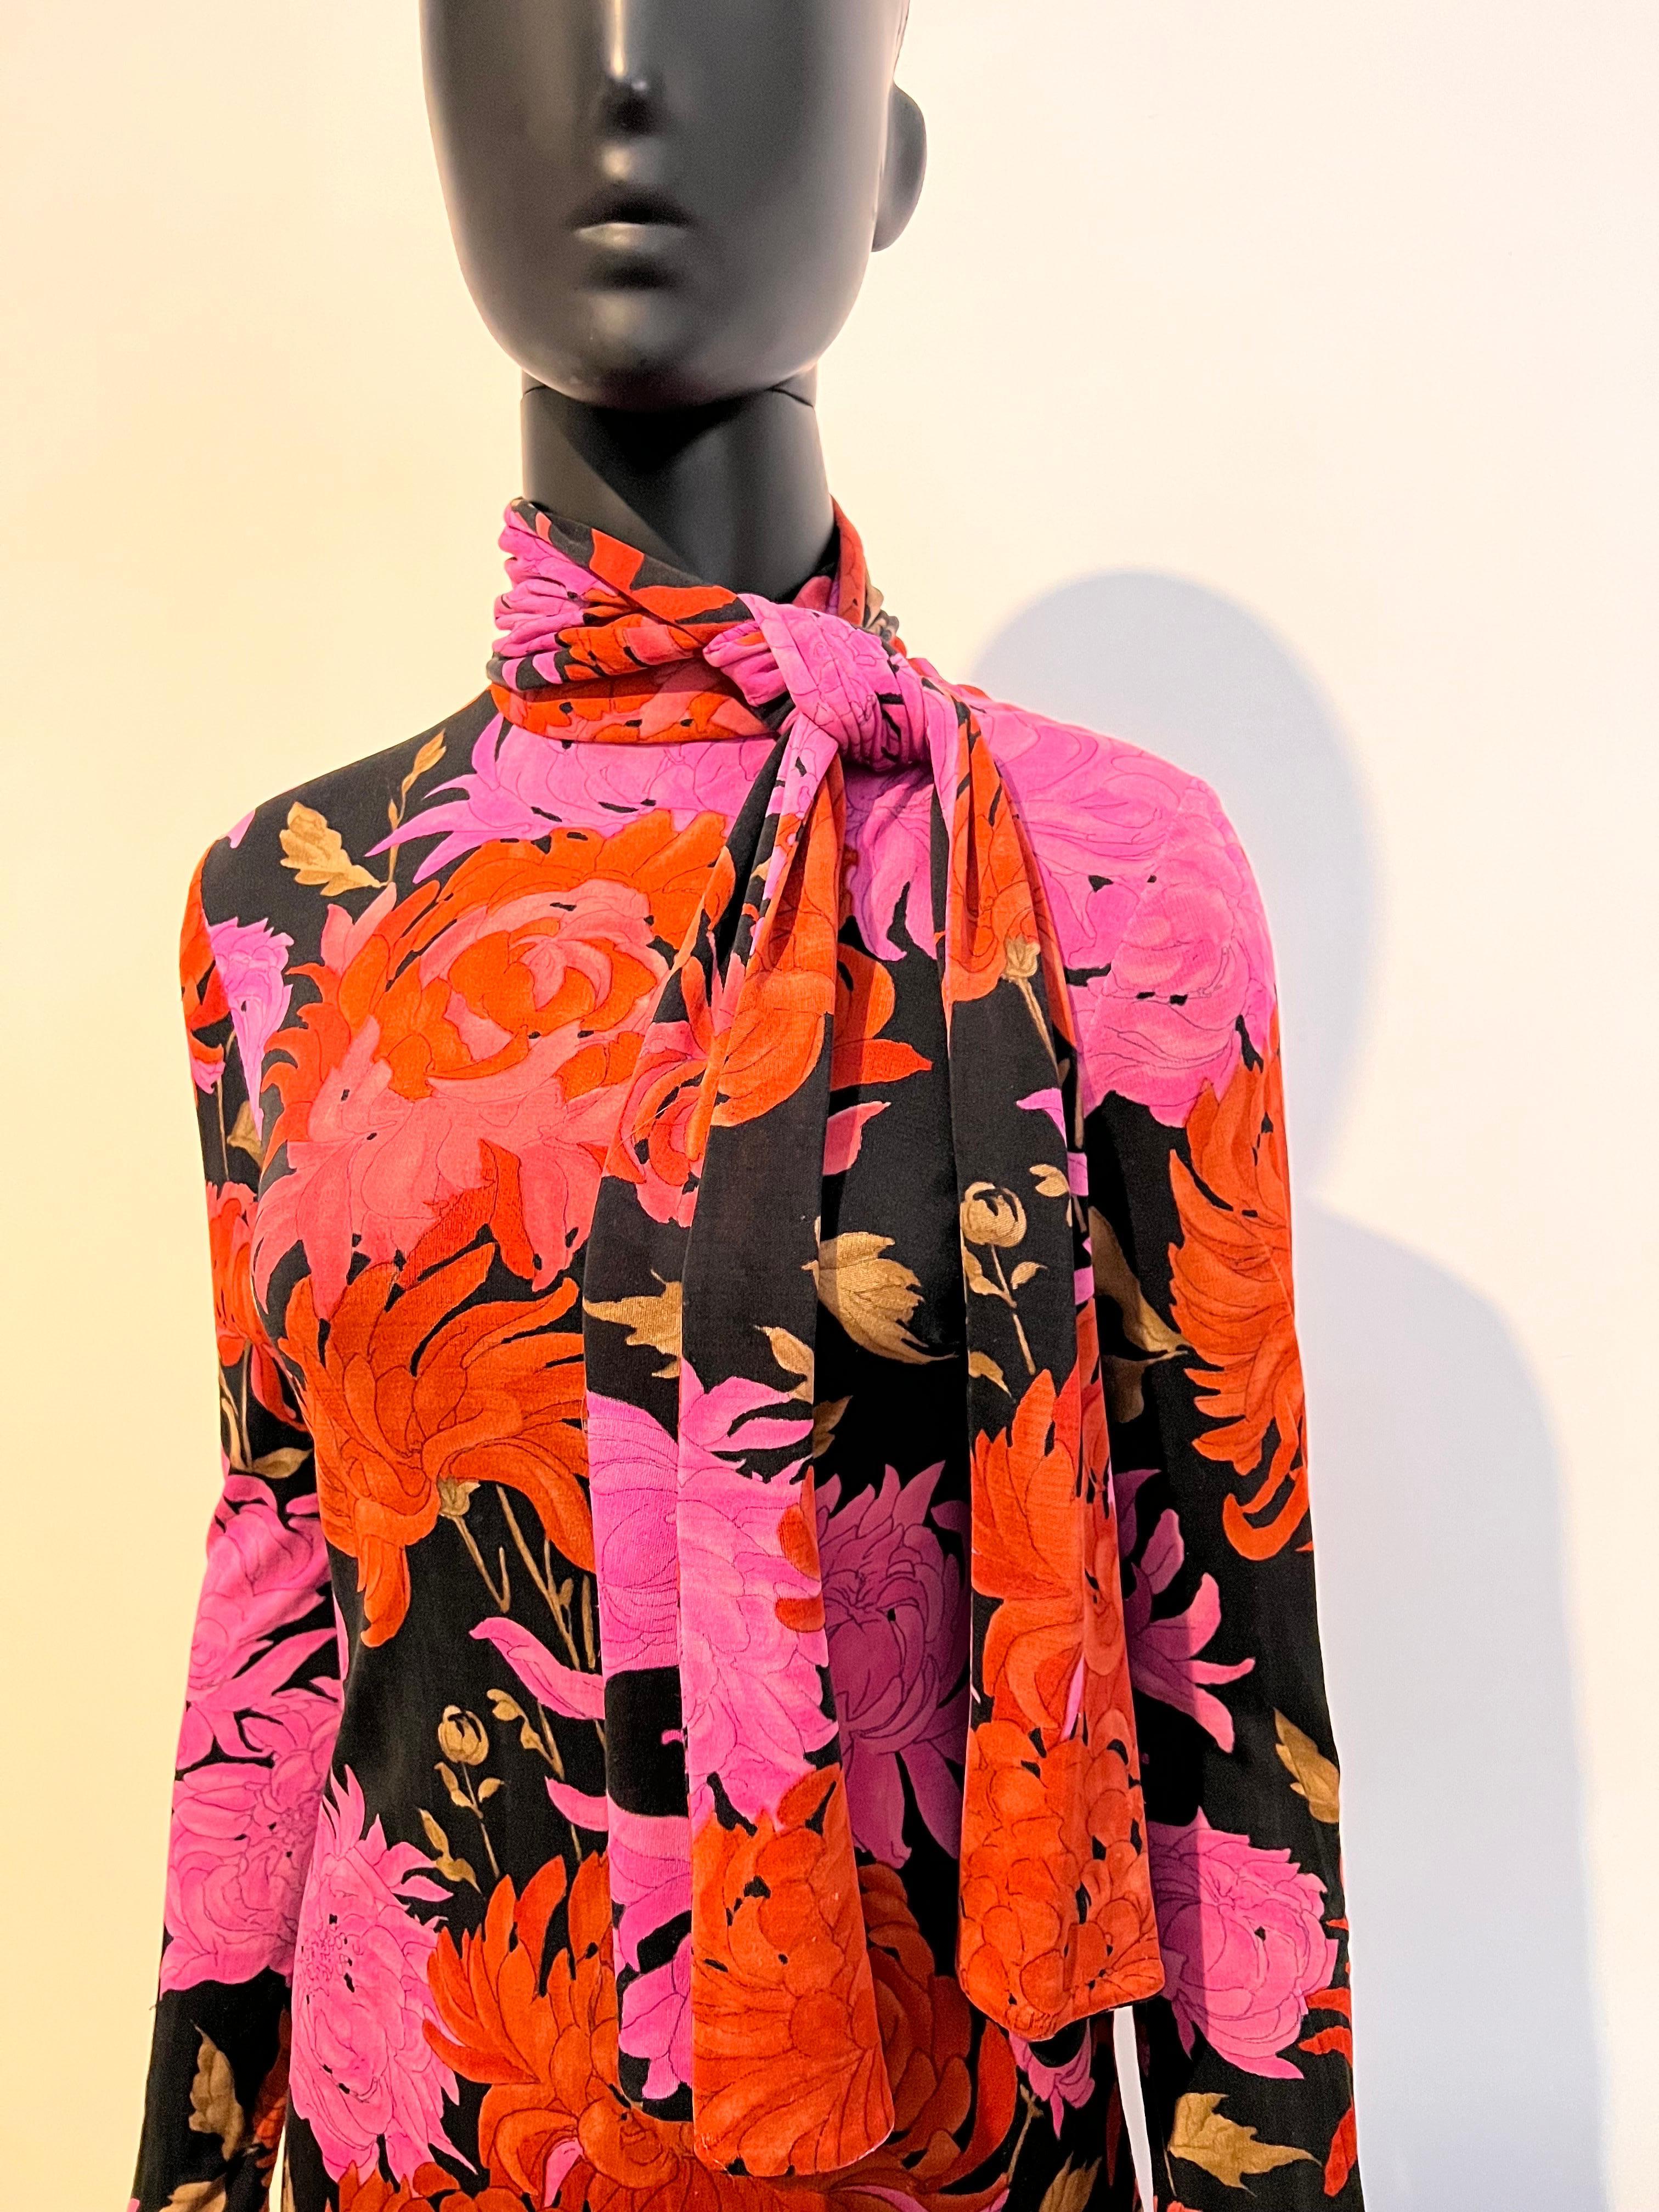 Collectors item by Leonard Paris from the 1970’s in eye catching, brightly coloured floral print

In silk jersey fabric 

Very short cut mini dress or long tunic depending on how you like to wear it. With high collar and matching striking classic